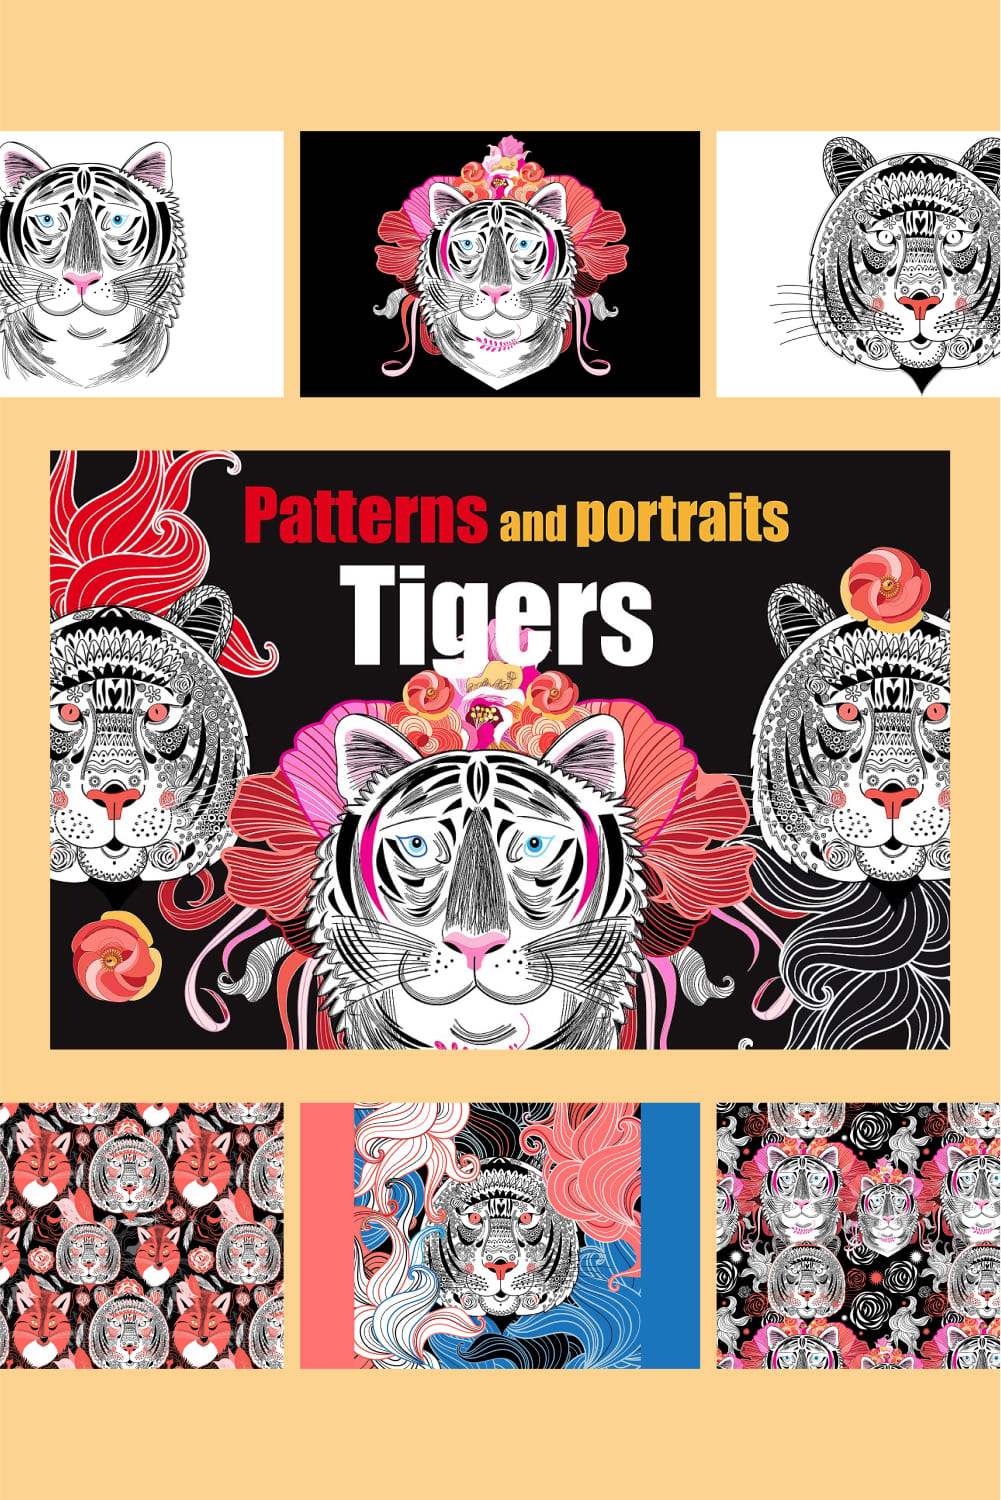 Patterns and Portraits of Tigers.